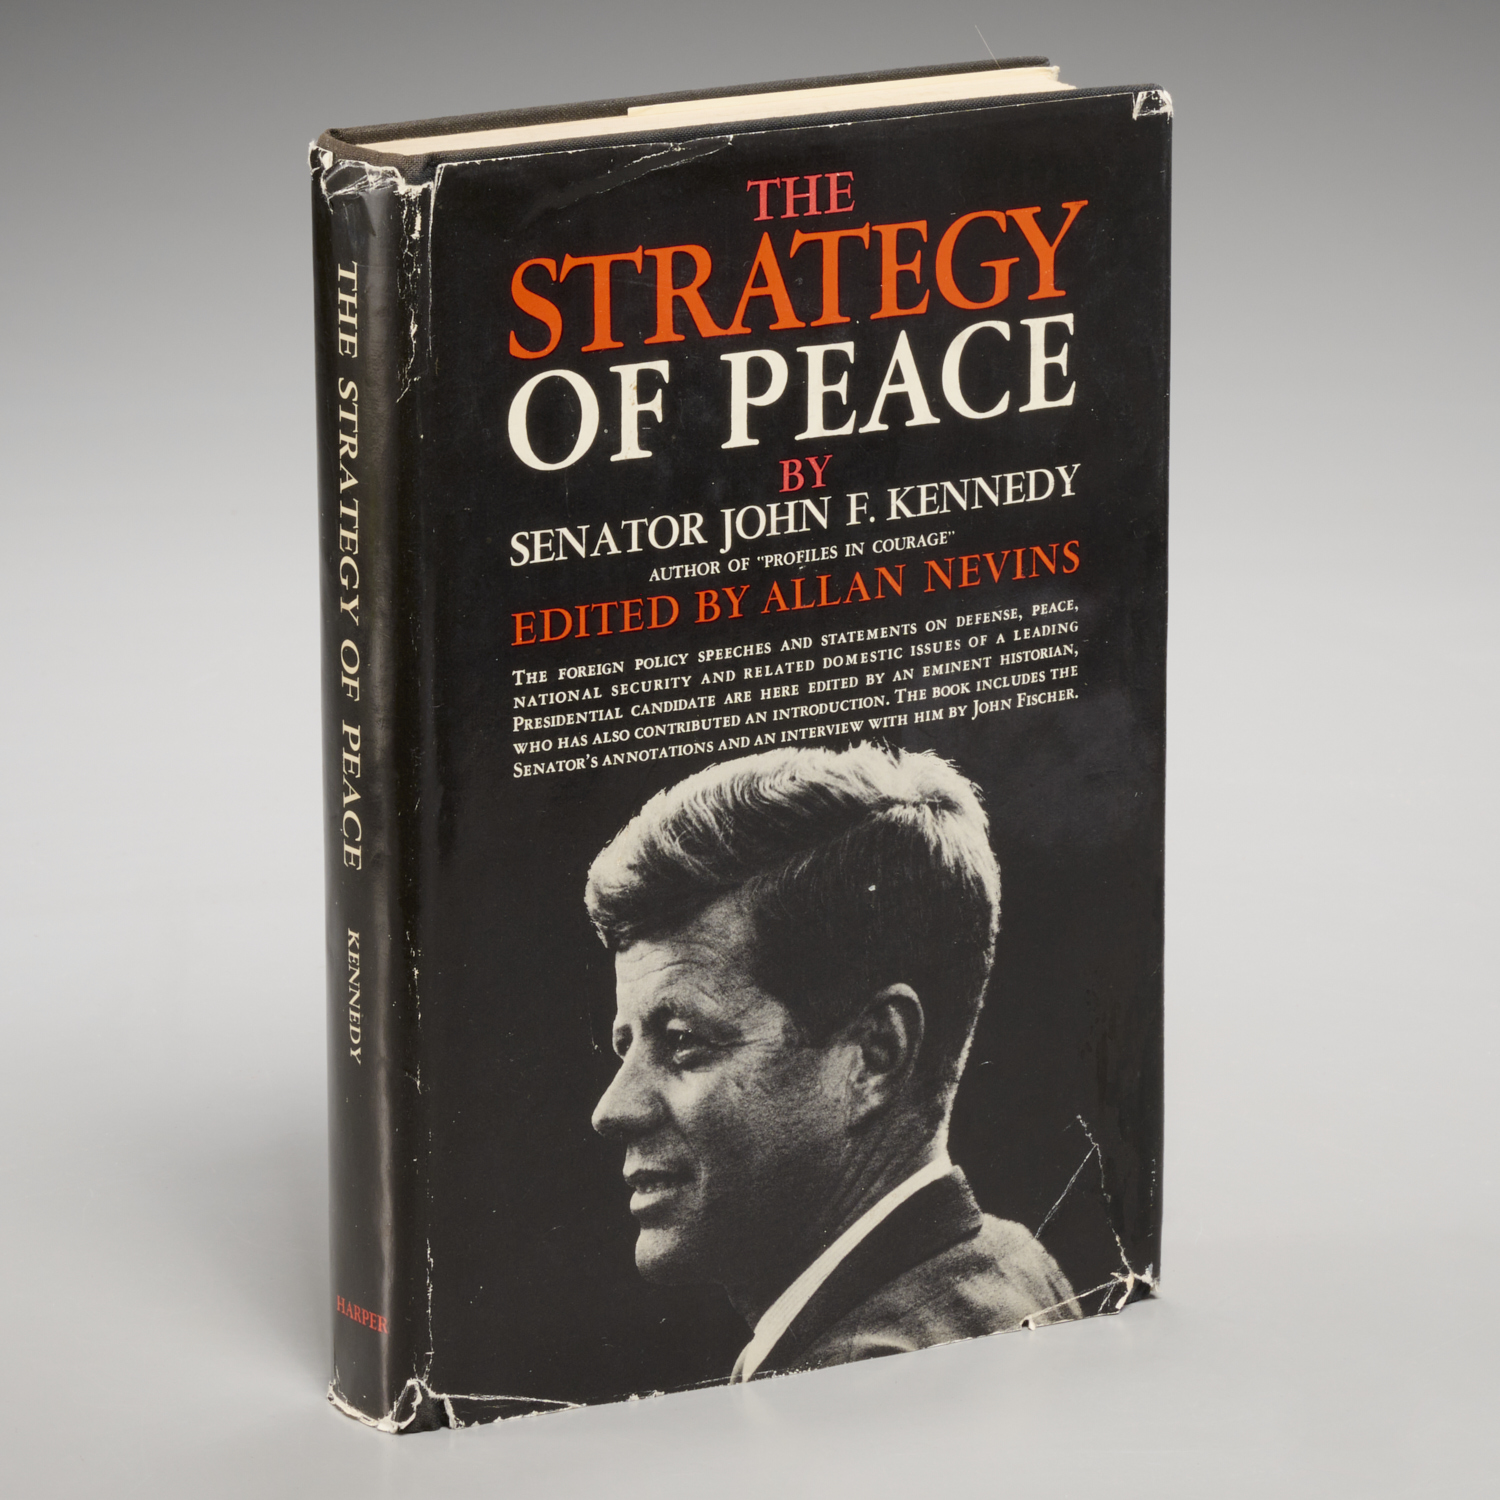 JOHN F. KENNEDY, THE STRATEGY OF